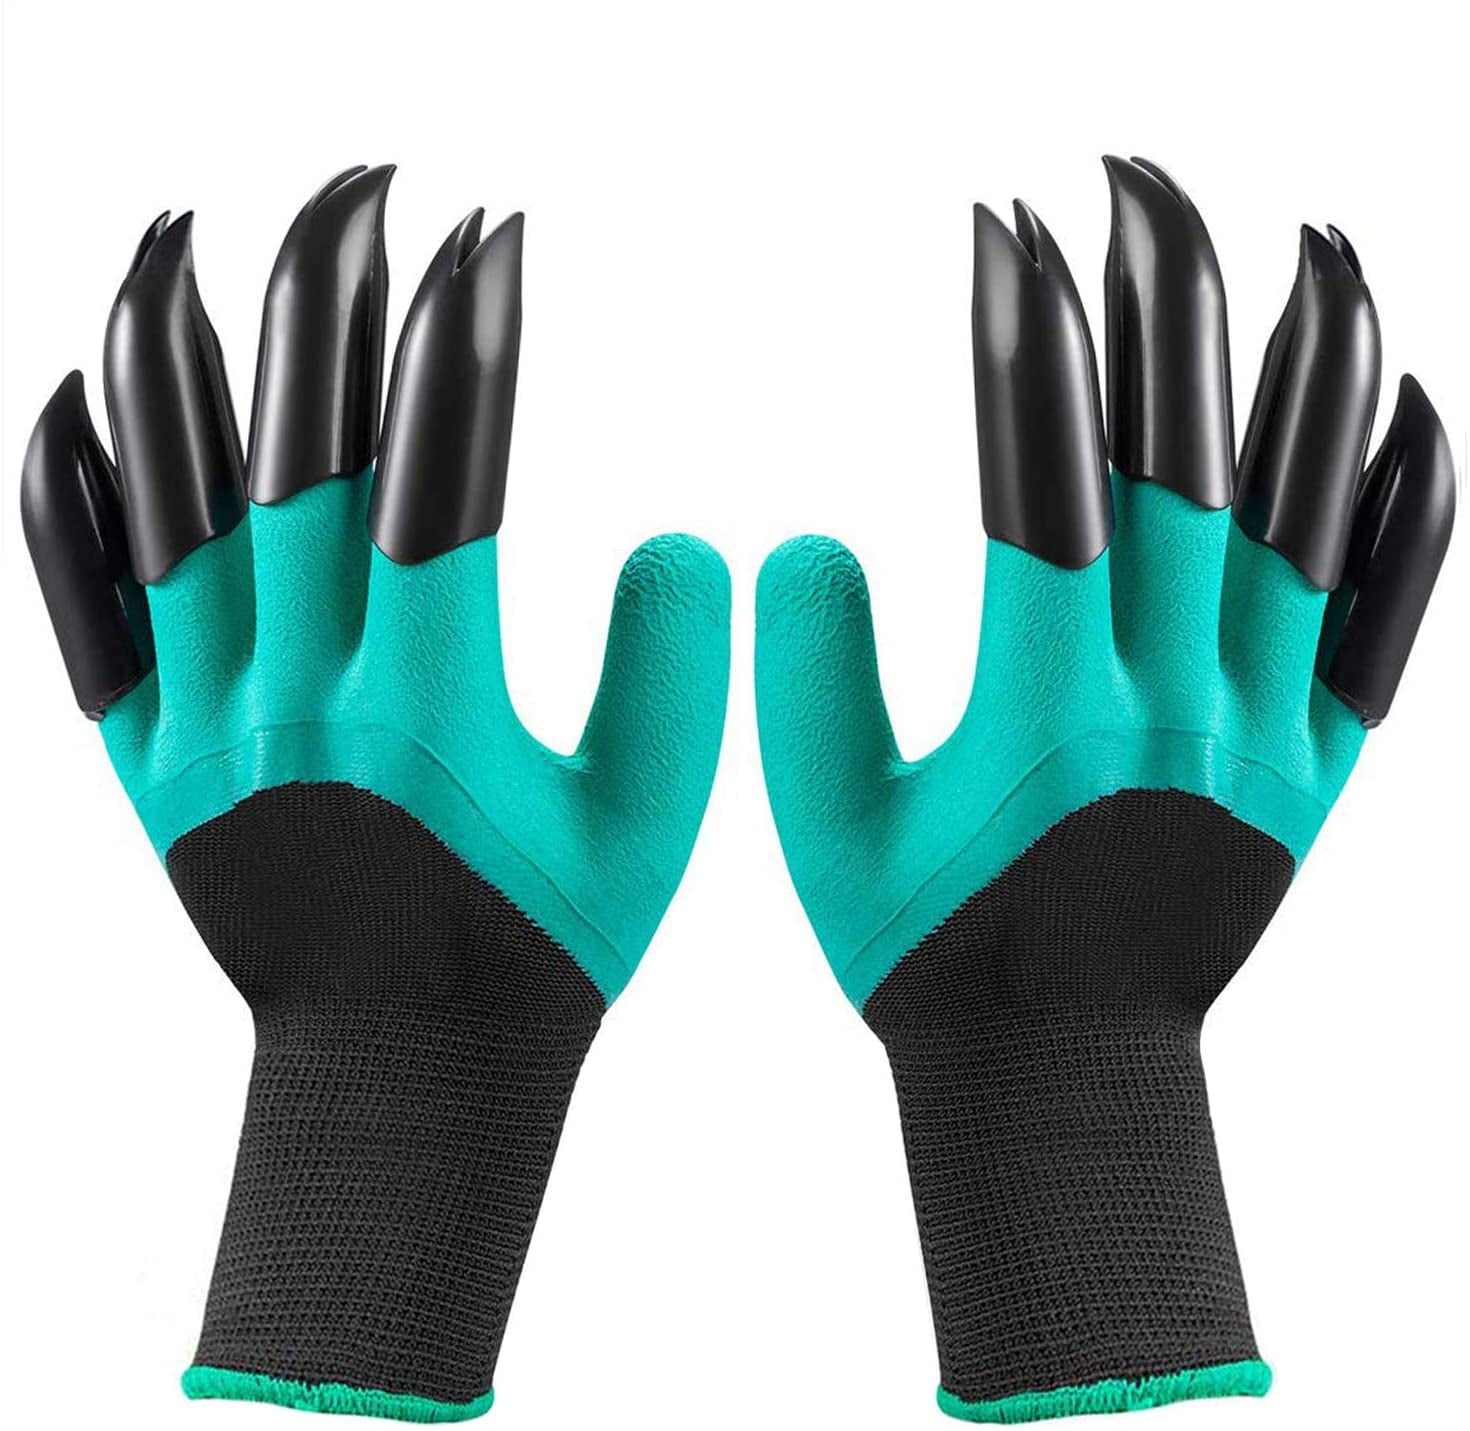 Garden Gloves With Fingertips Claws For Gardening Dig Planting 